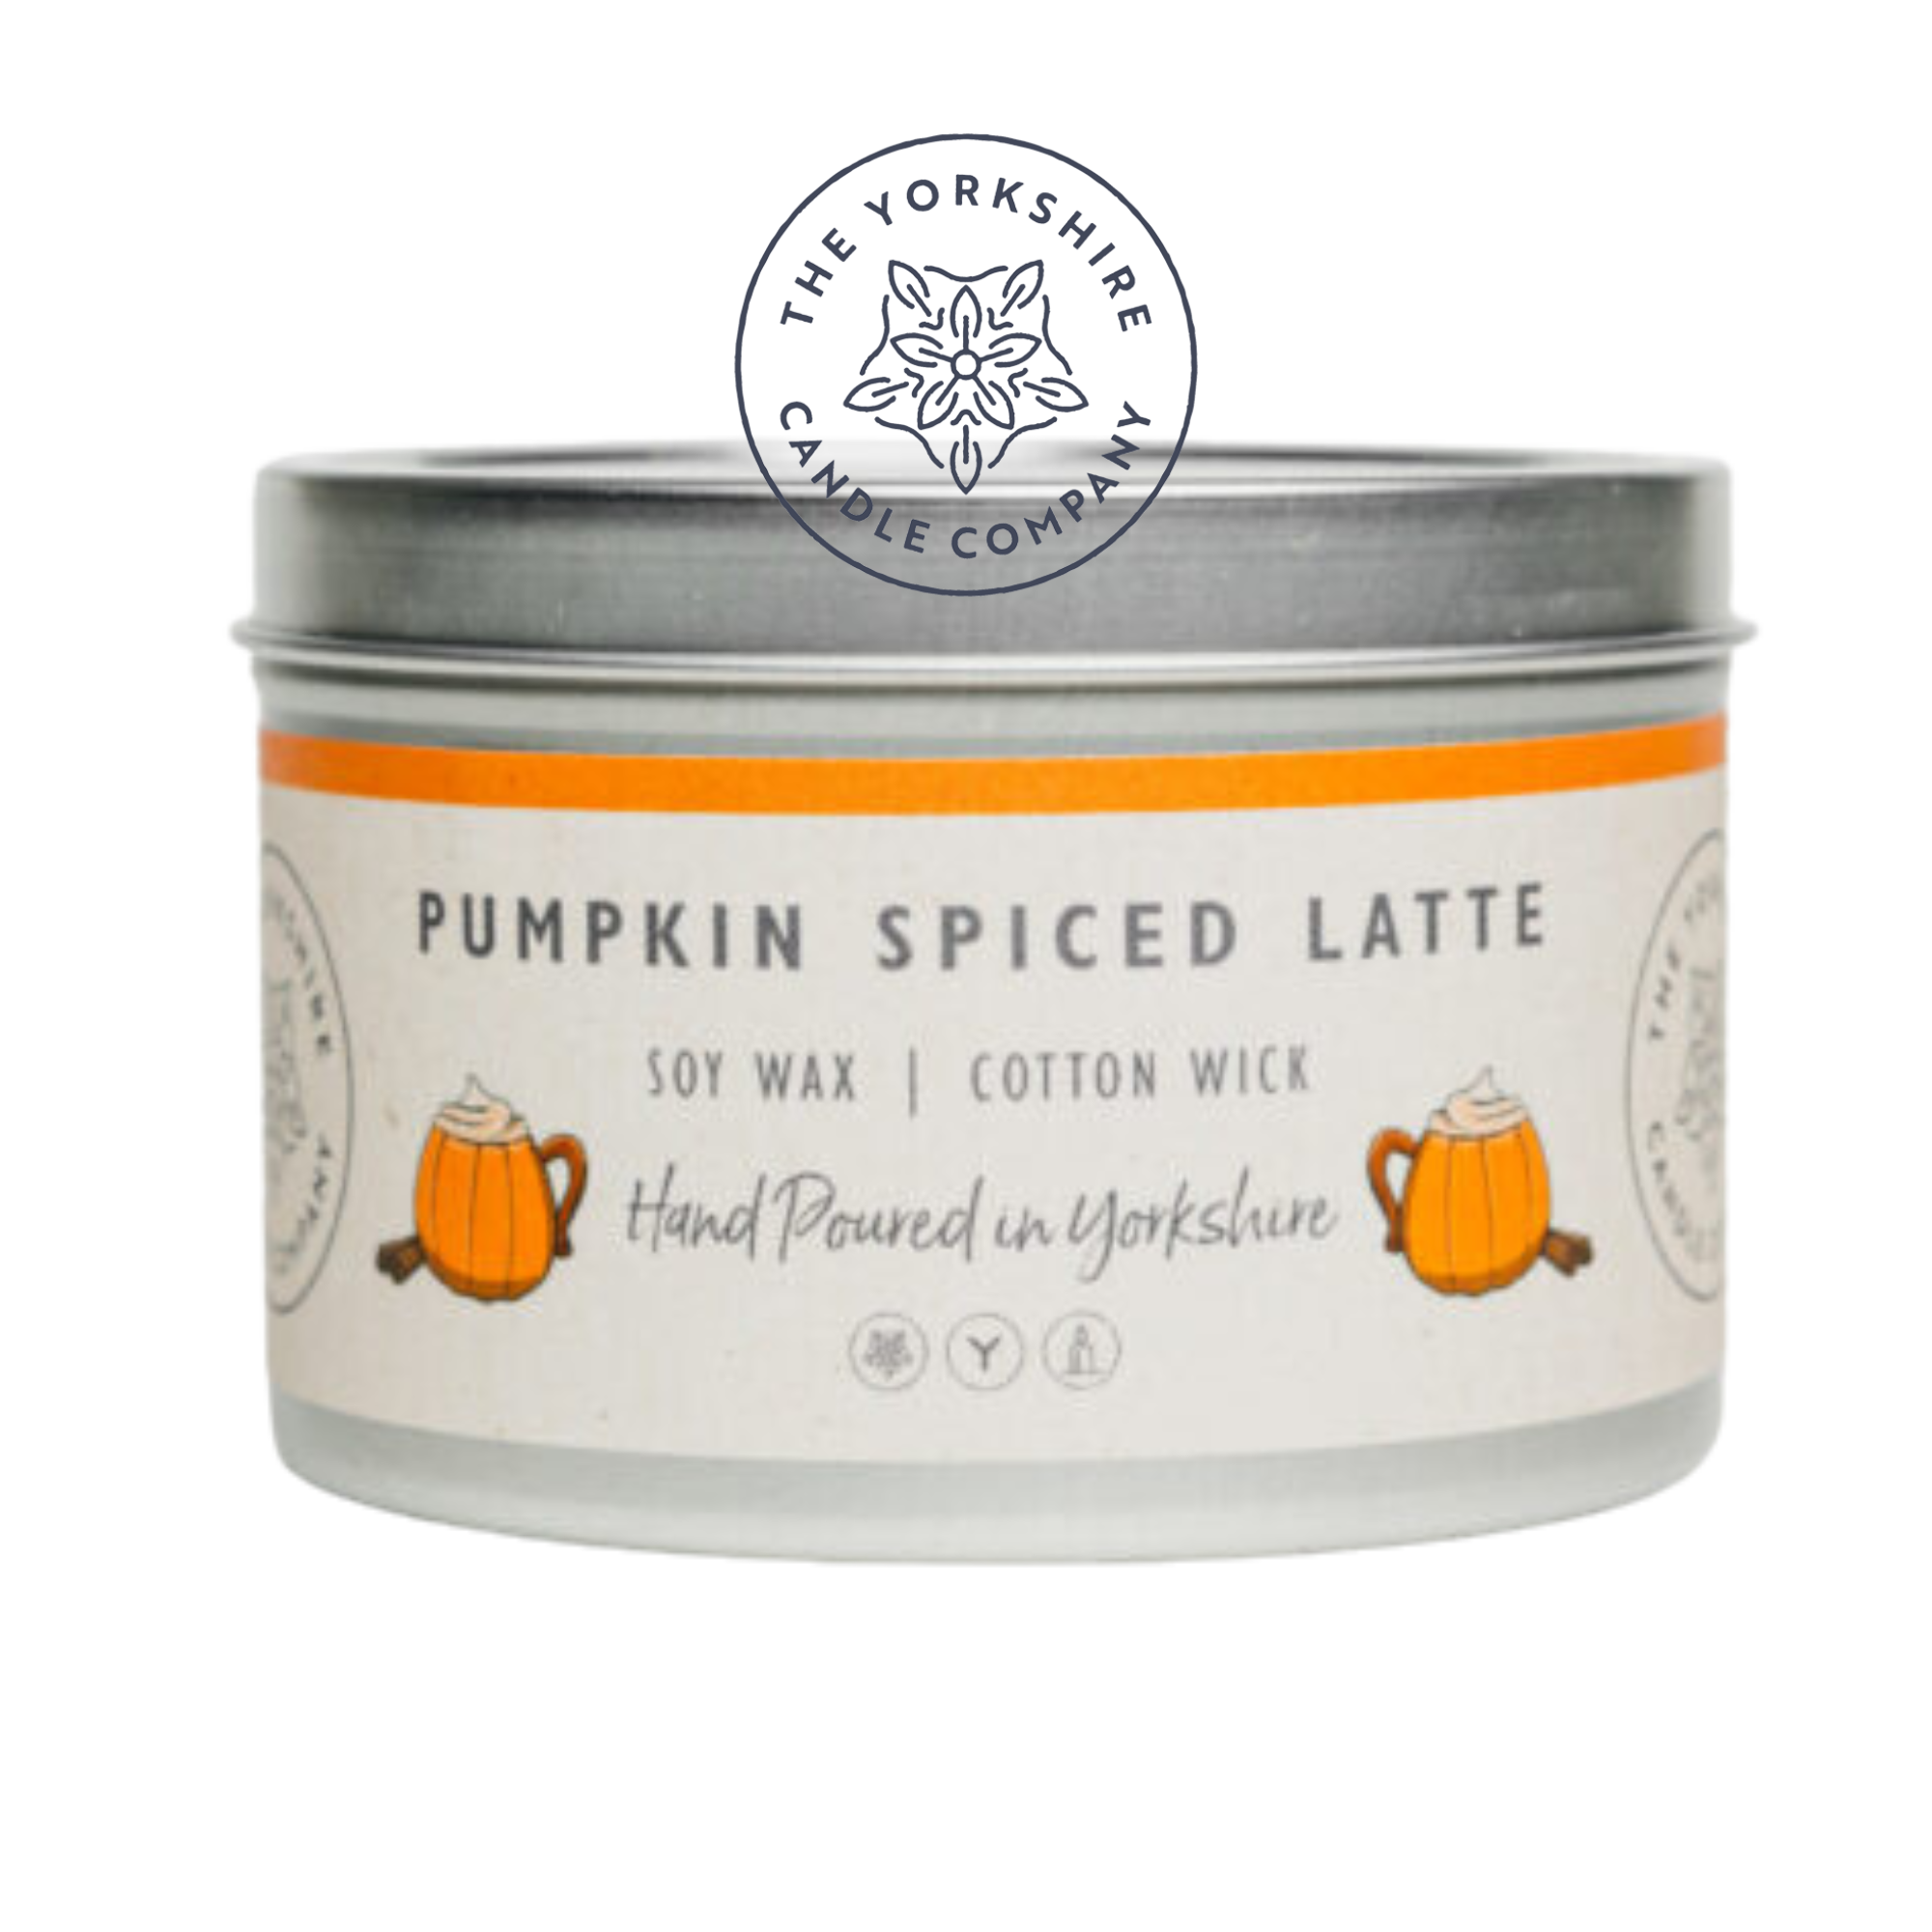 Pumpkin Spiced Latte - Soy Wax Cotton Wick Hand Poured Candle by The Yorkshire Candle Company